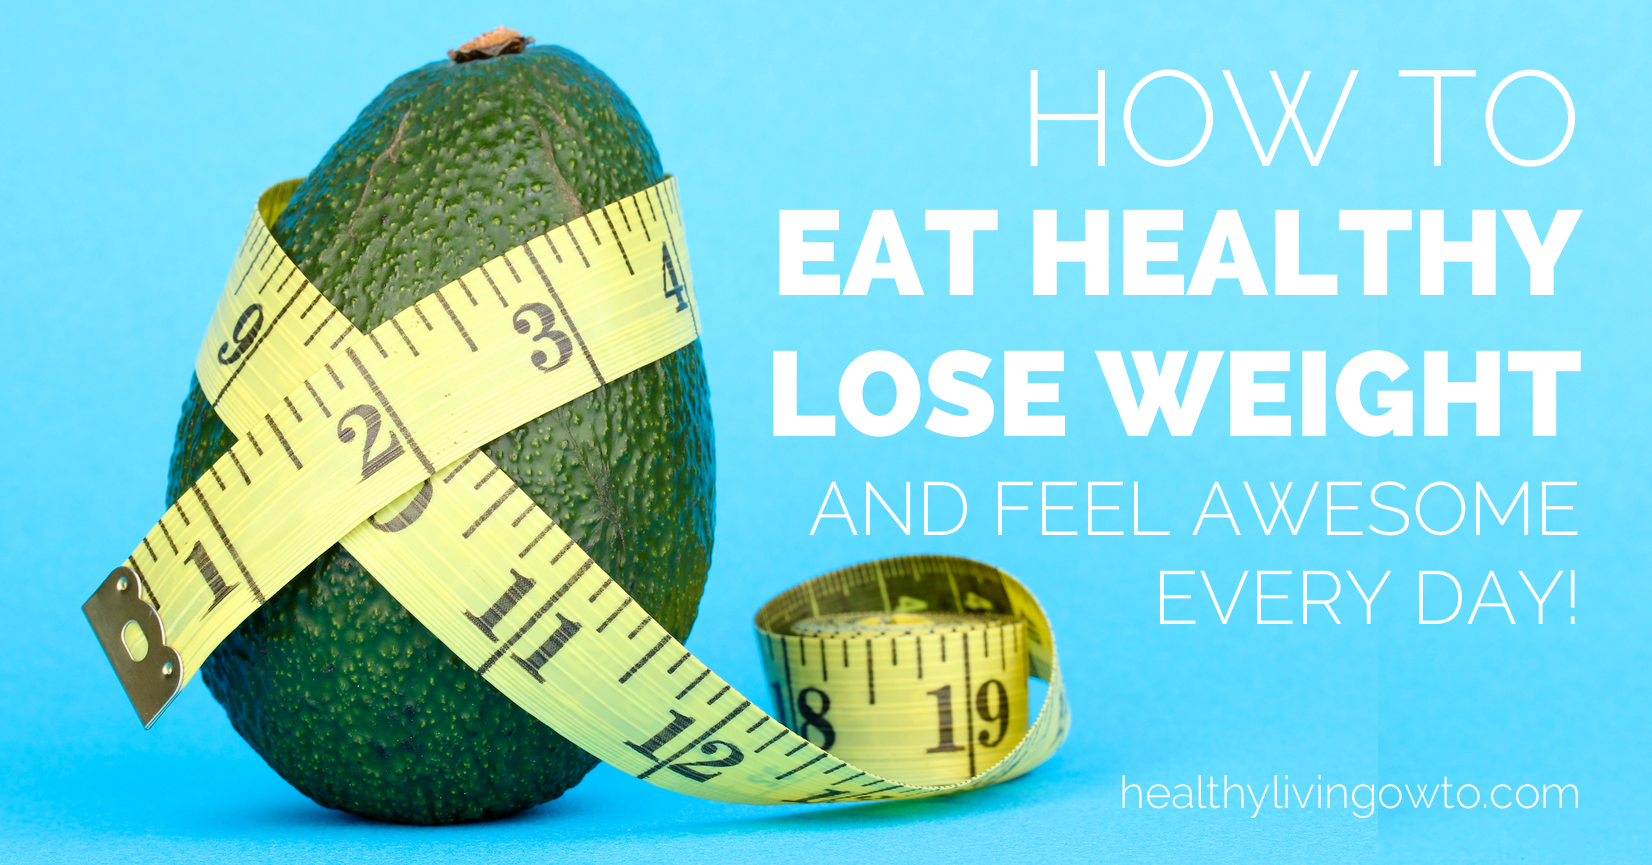 How To Eat Healthy Lose Weight And Feel Awesome Every Day | healthylivinghowto.com